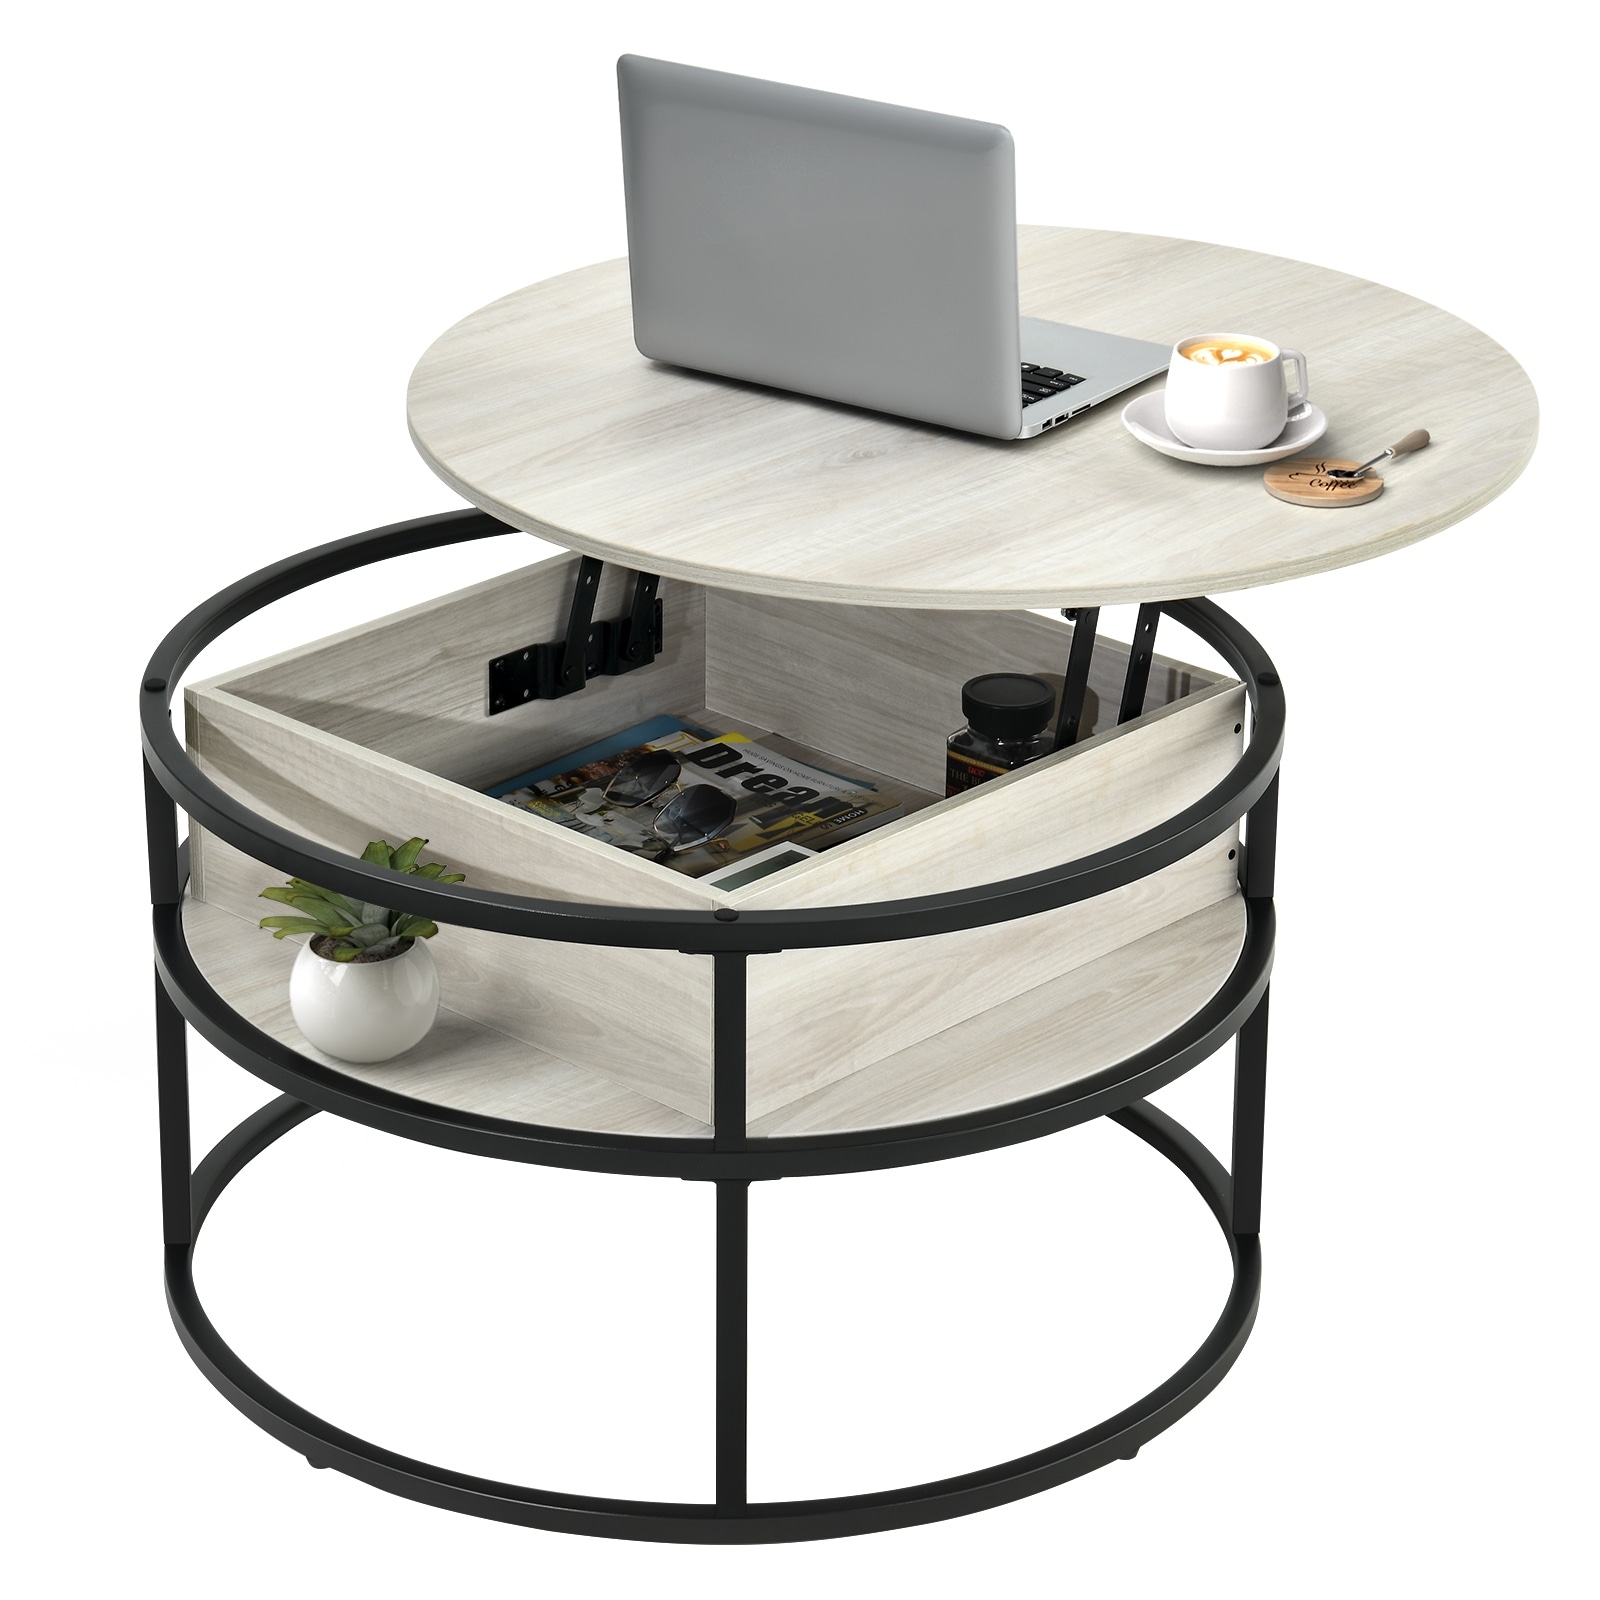 Wood Round Lift Top Coffee Table White Oak with Hidden Storage Compartment -  wedealfu, OSFCT0006085WFU